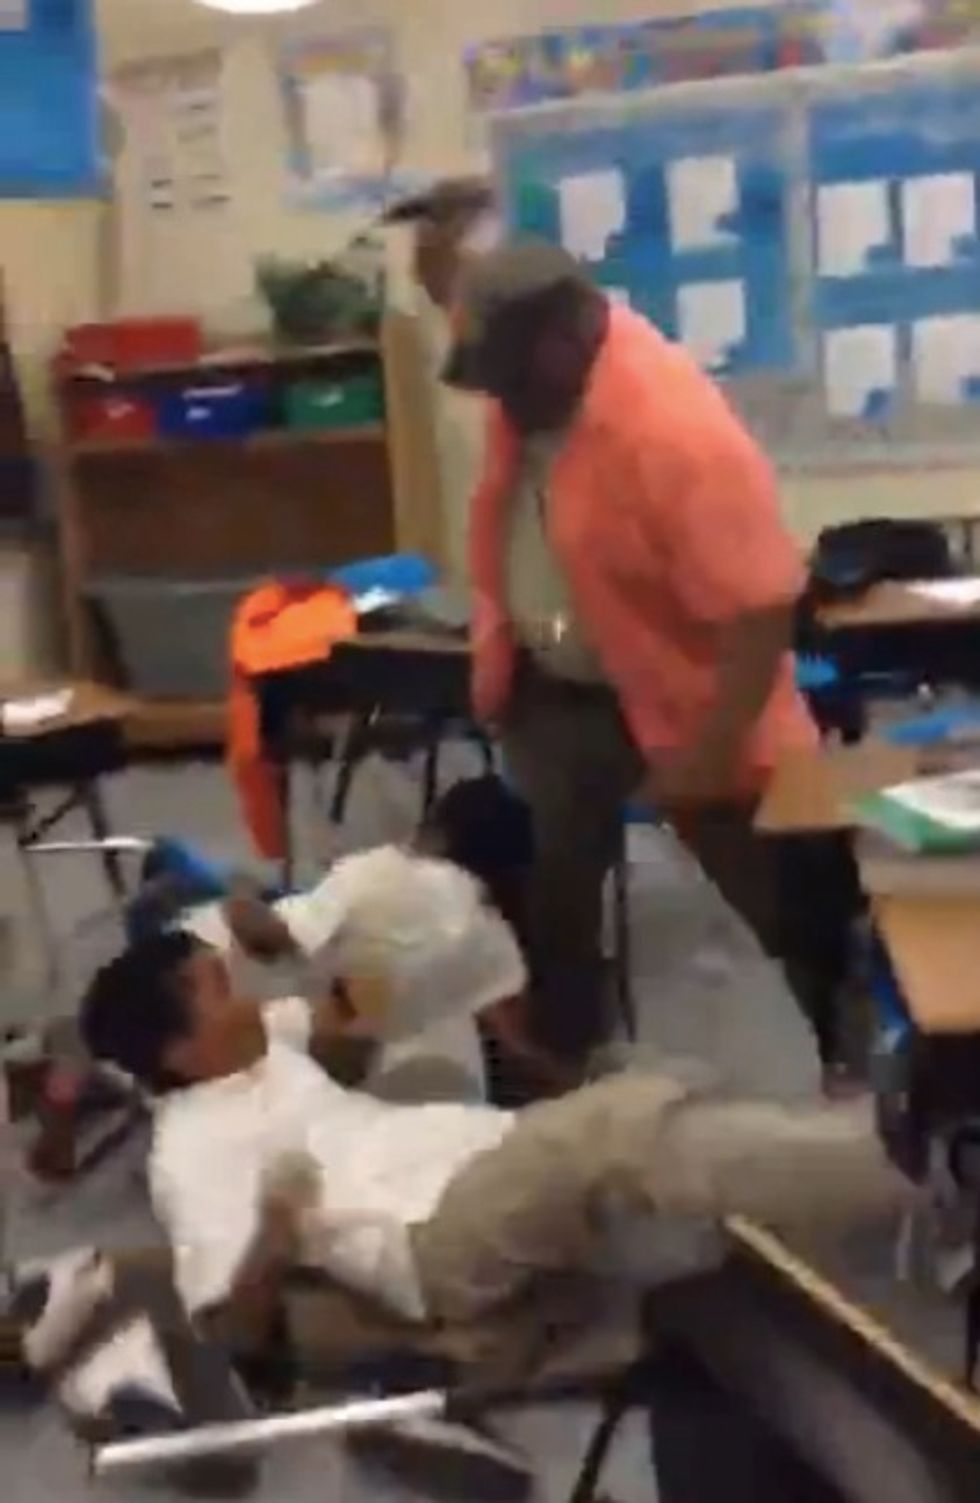 After Students Start Brawling in His Classroom, Teacher Unleashes His Belt